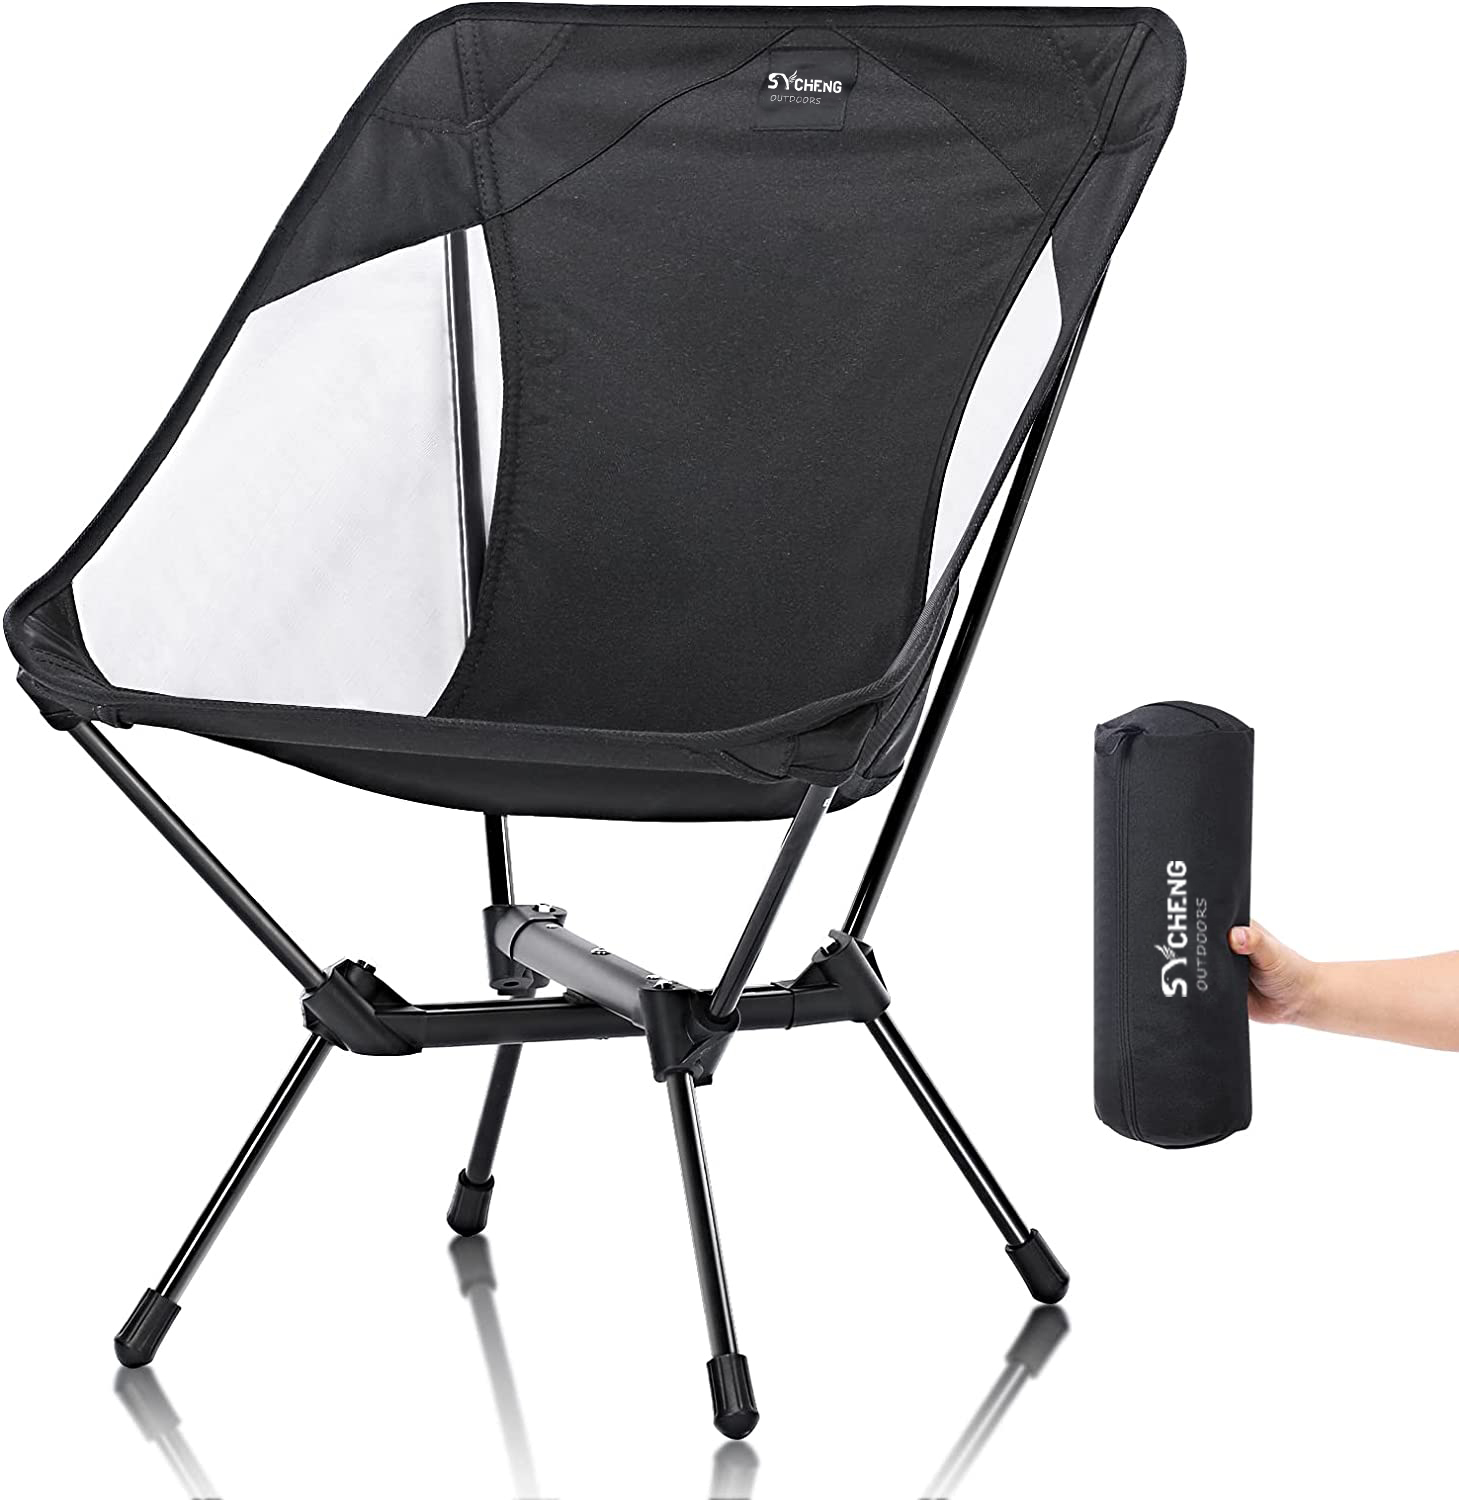 SYCHENG New Portable Camping Chairs with Side Pockets Adjustable Height Foldable Chairs for Backpacking Hiking Beach Camping